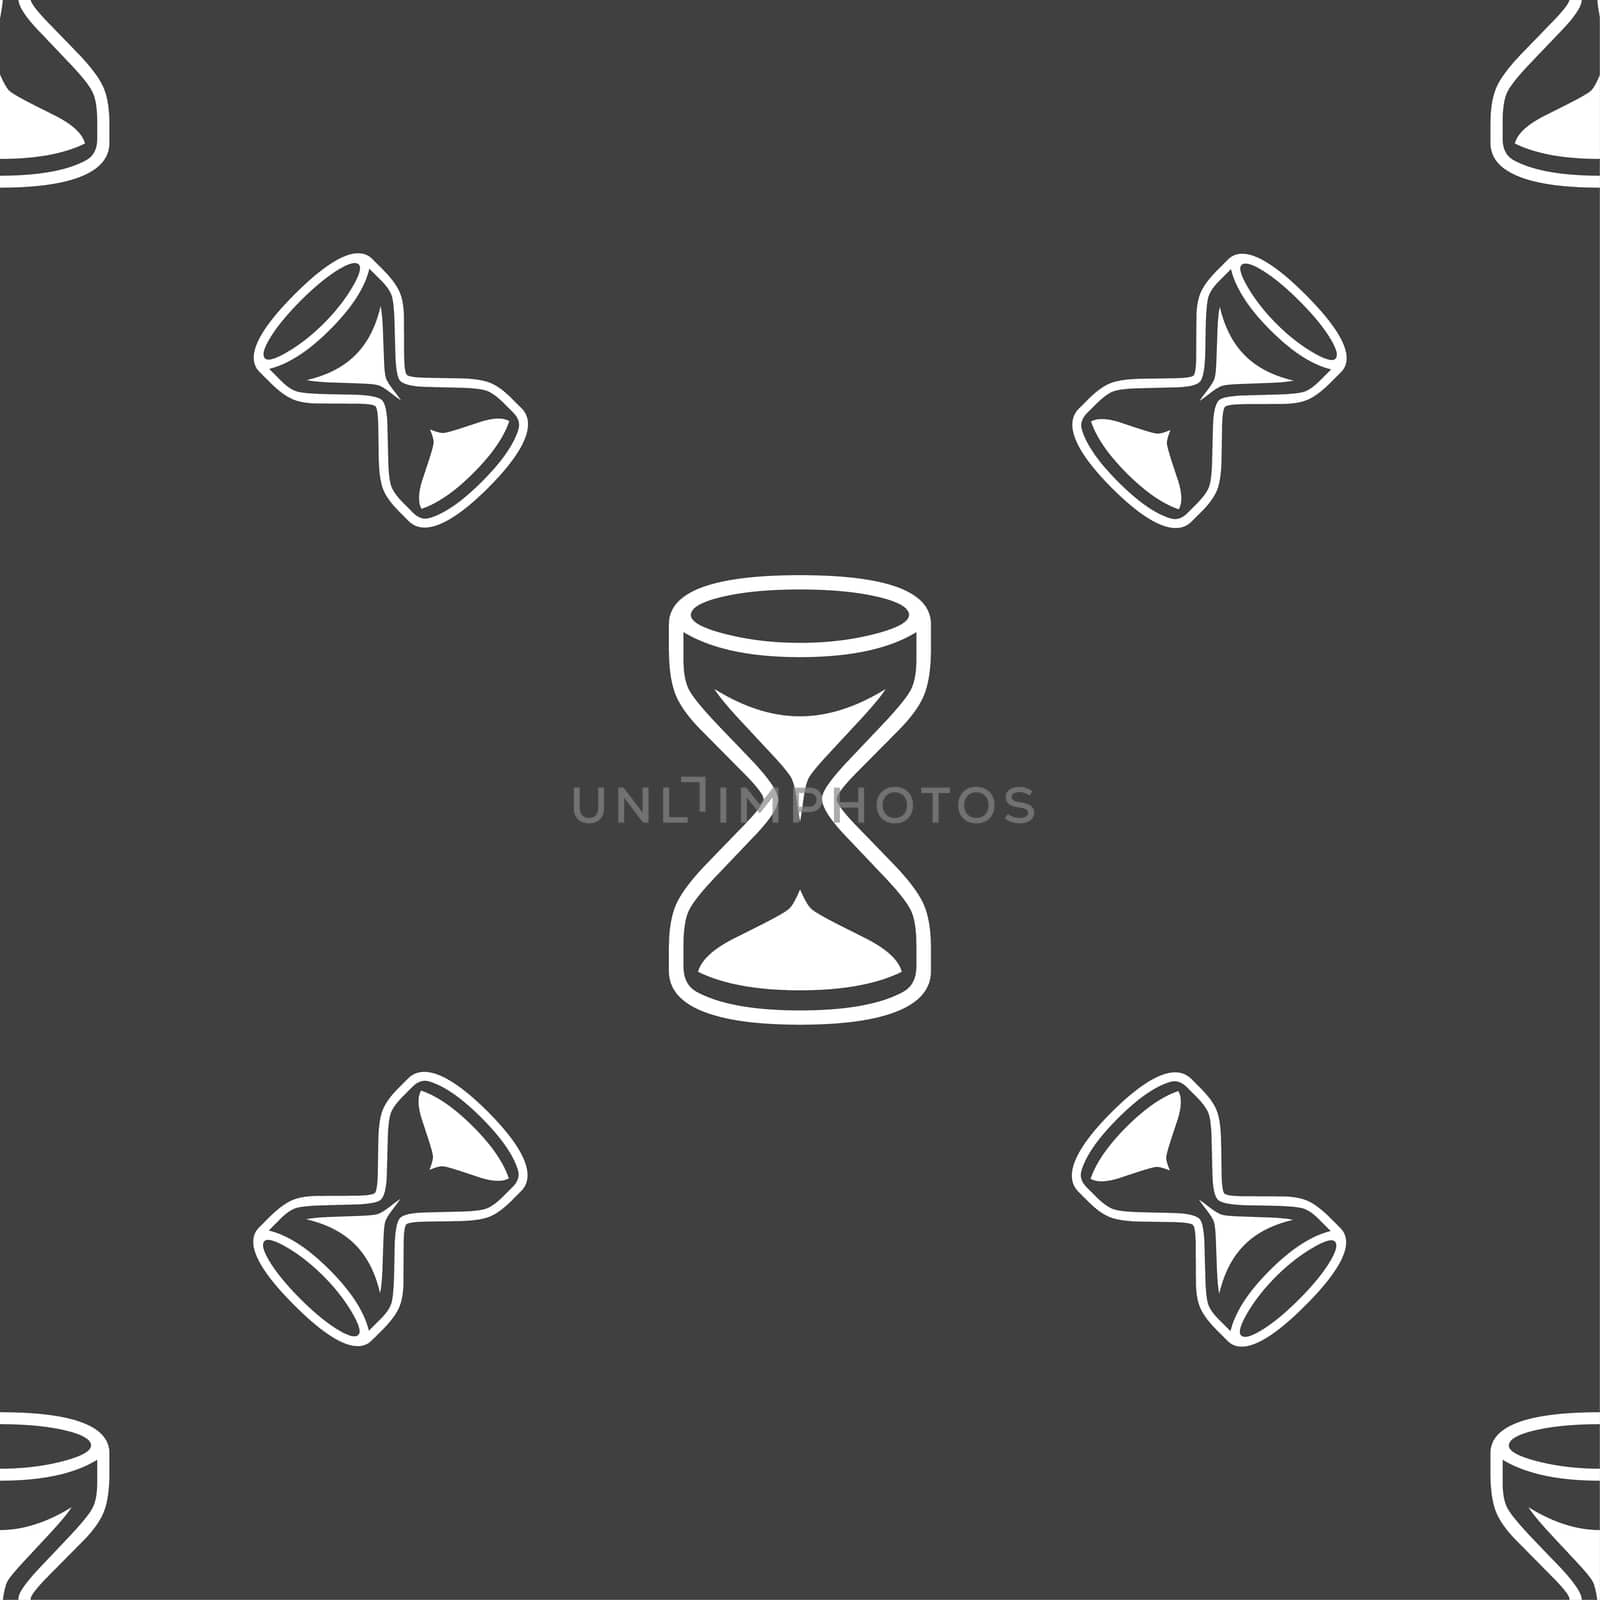 Hourglass sign icon. Sand timer symbol. Seamless pattern on a gray background. illustration